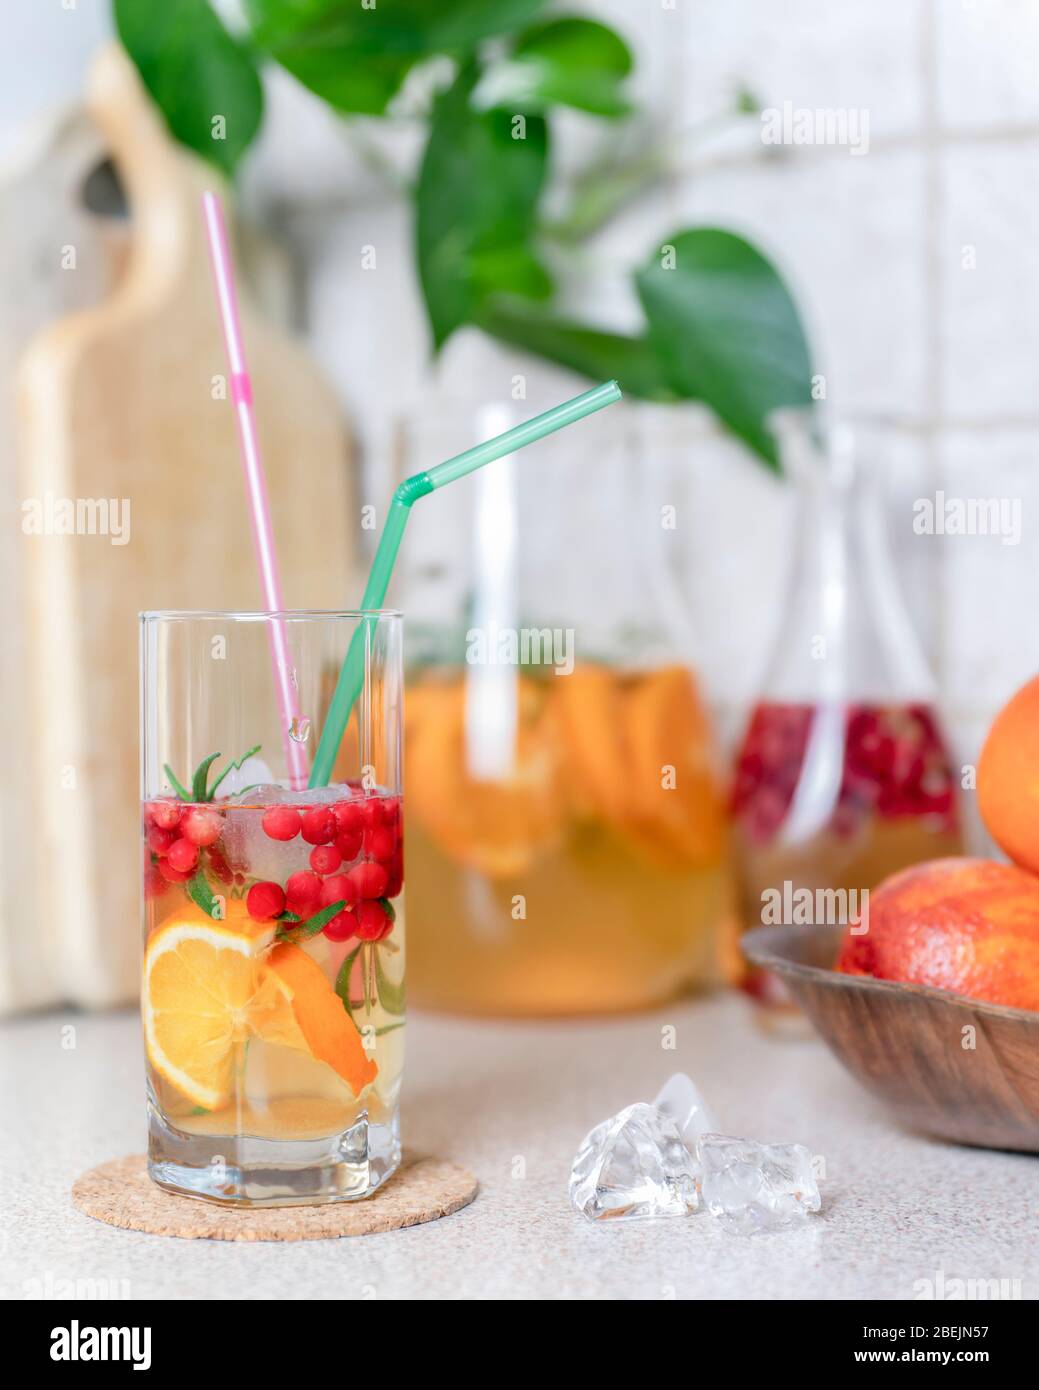 Homemade lemonade with lemon, orange and cranberry with ice in glass and jug on table. Summer cold refreshing drink. Stock Photo